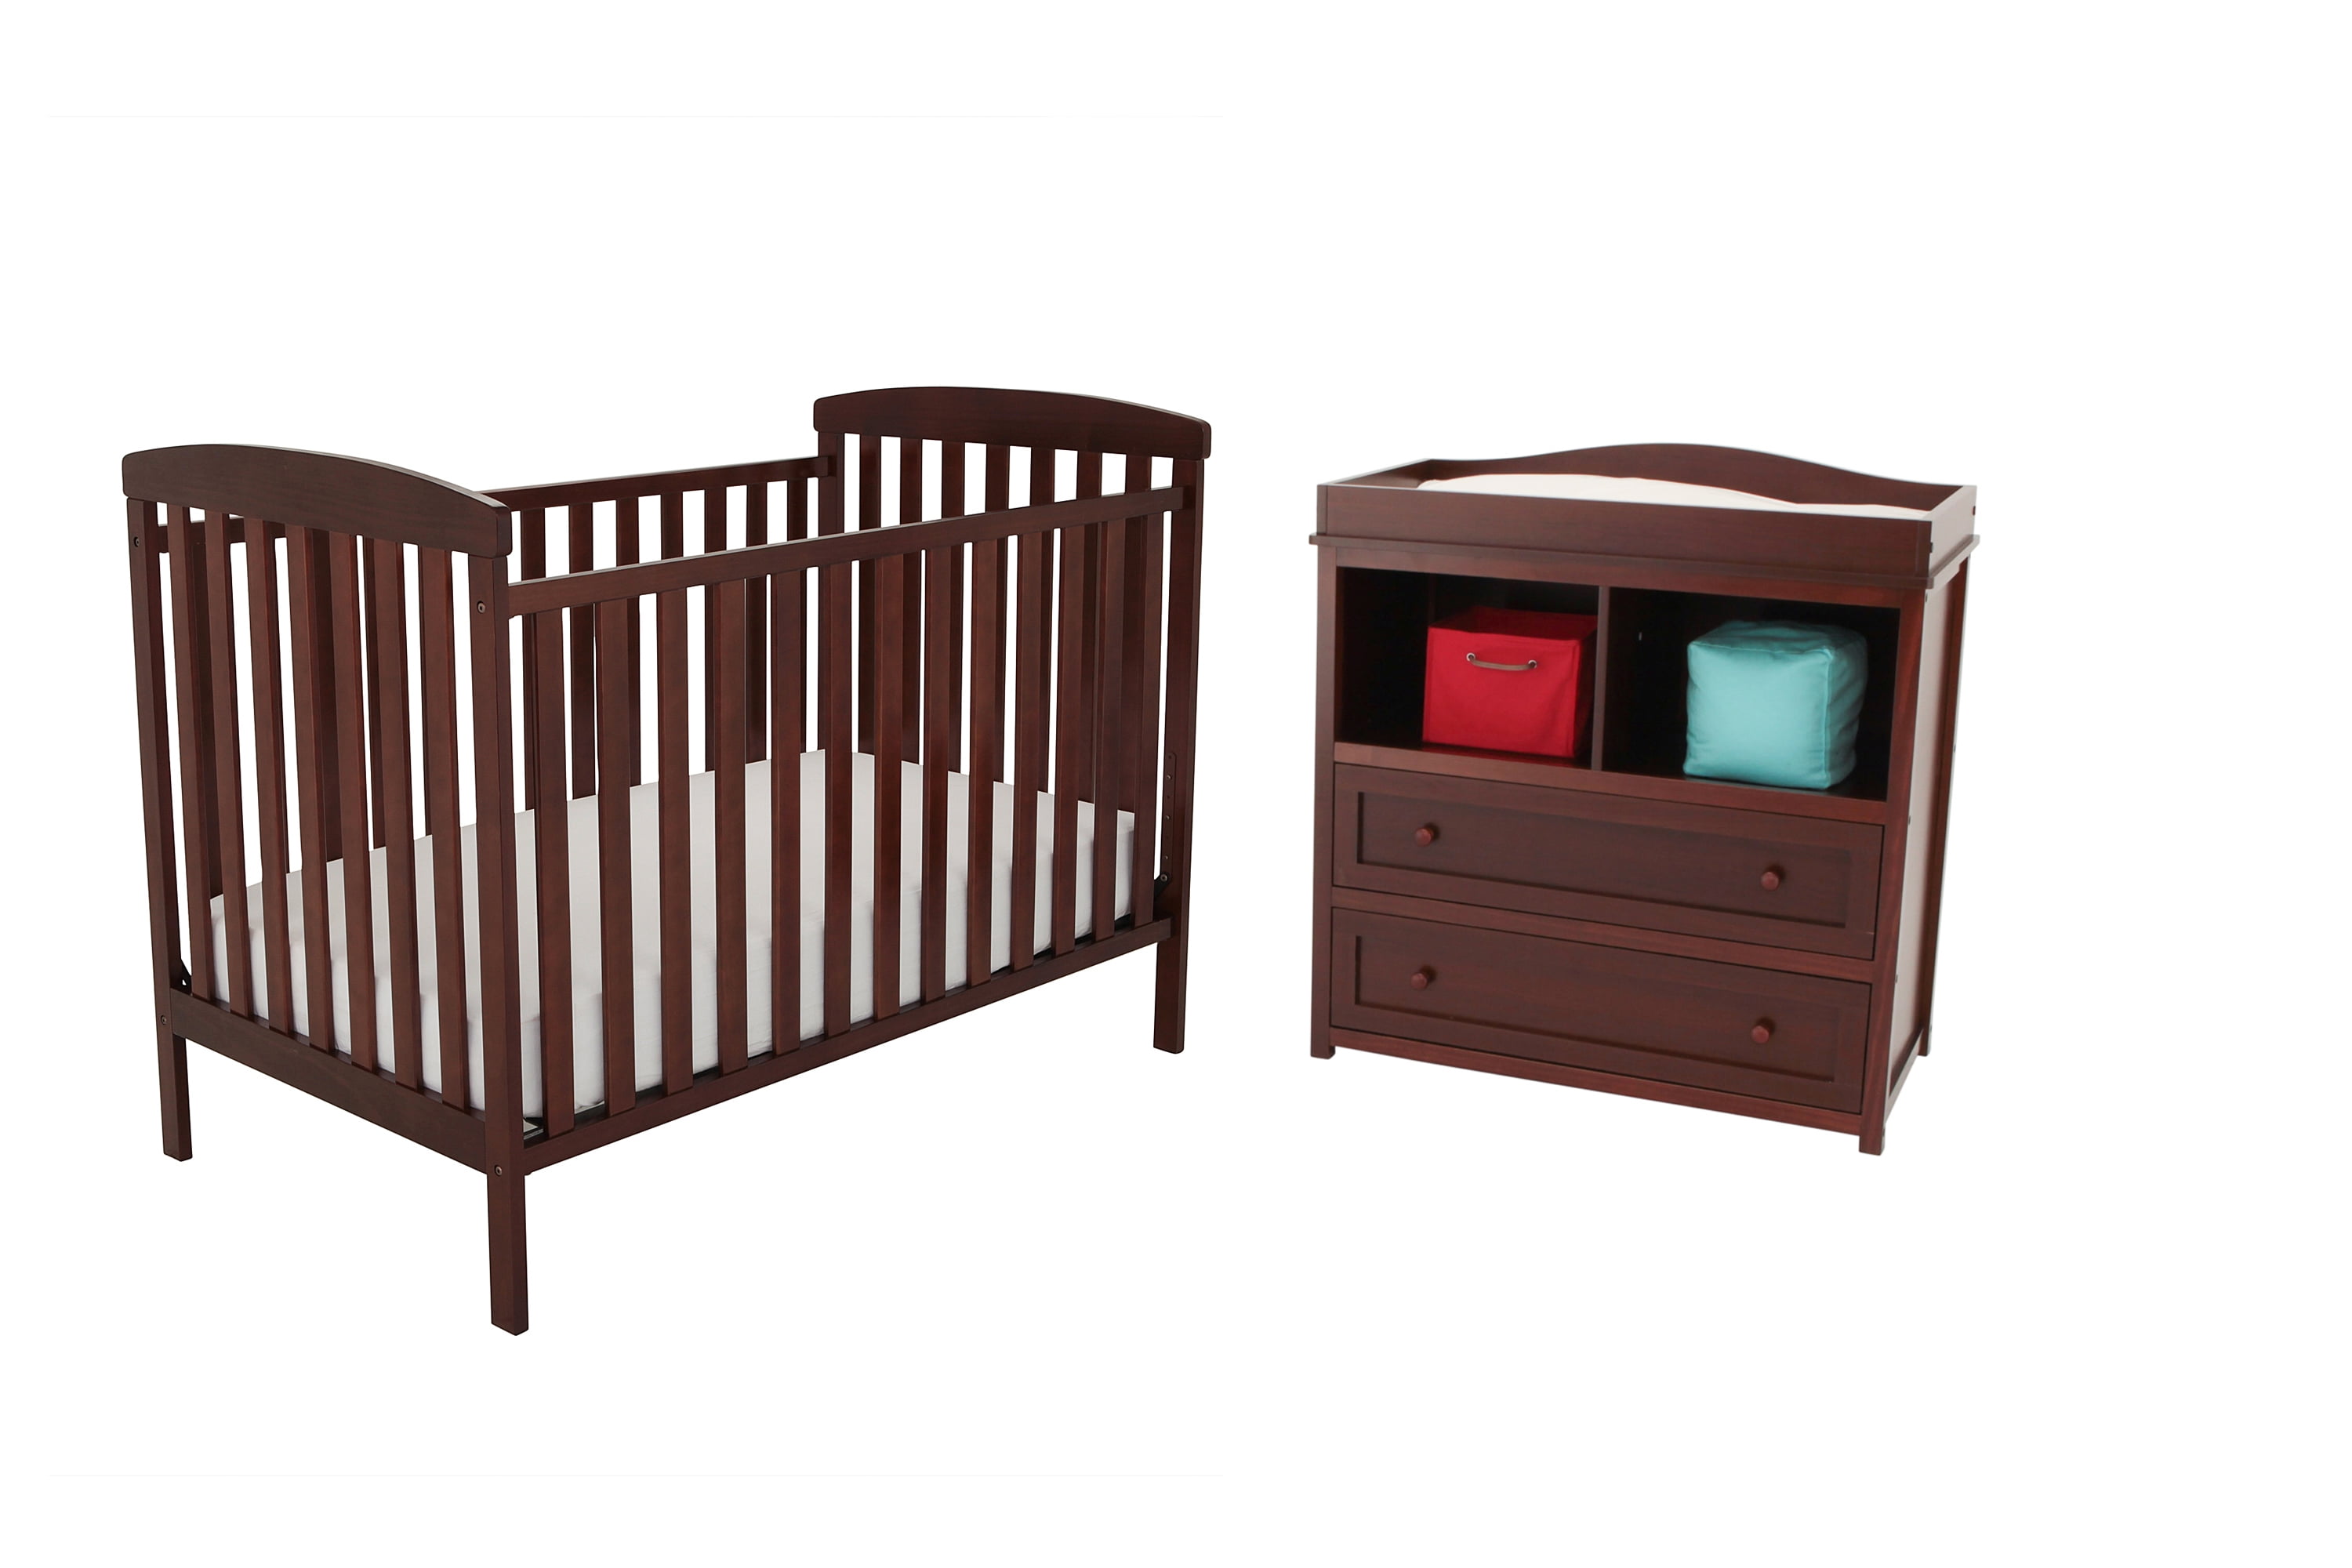 changing table and dresser set